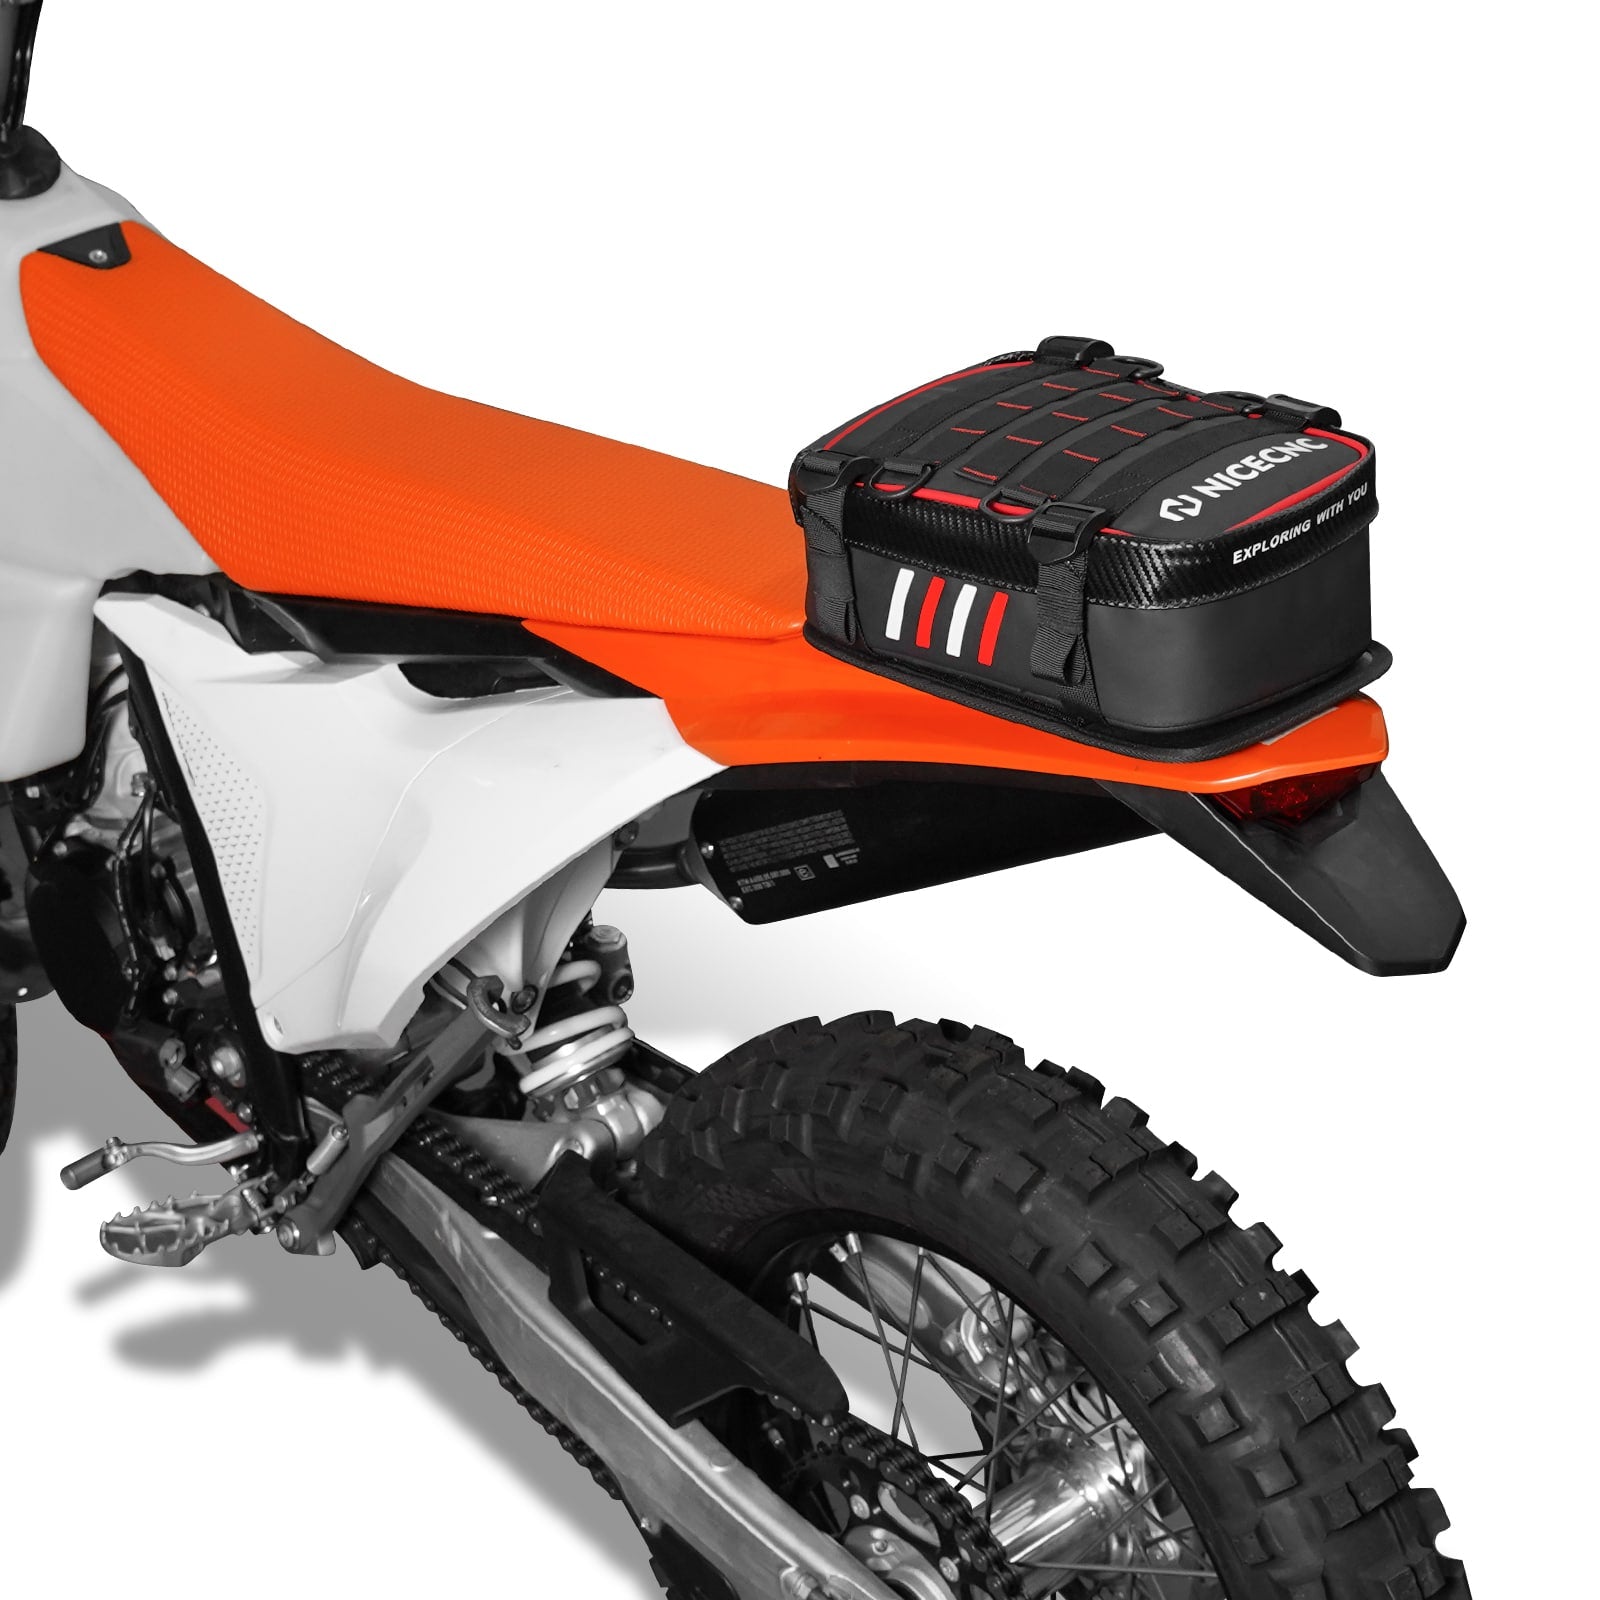 Universal Motorcycle Rear Fender Bag with Tool Roll Bag For Dirt Bike Adventure Off-road Riding